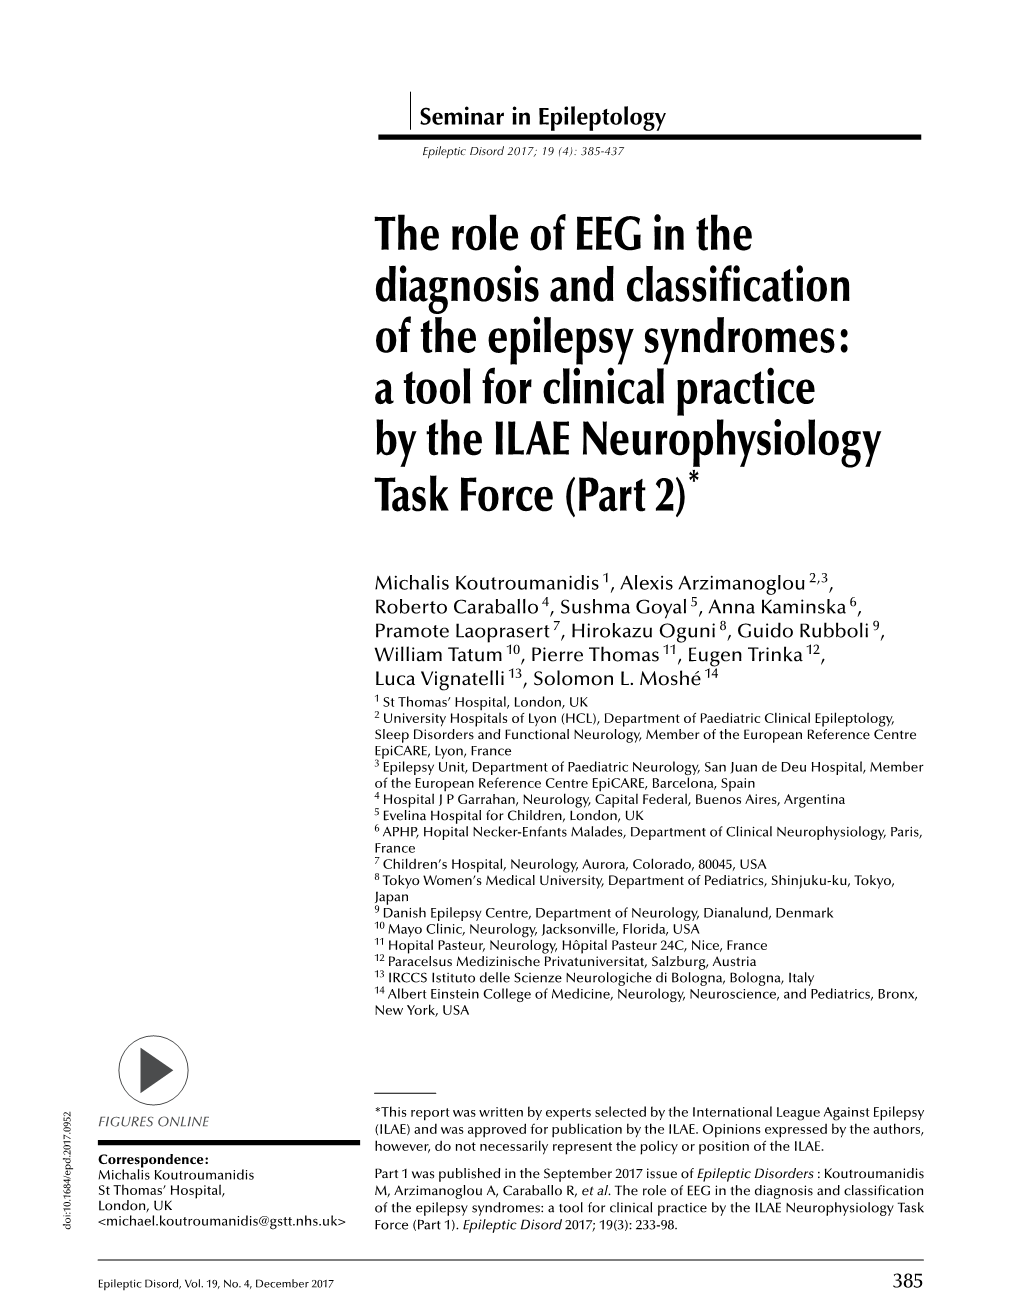 The Role of EEG in the Diagnosis and Classification of the Epilepsy